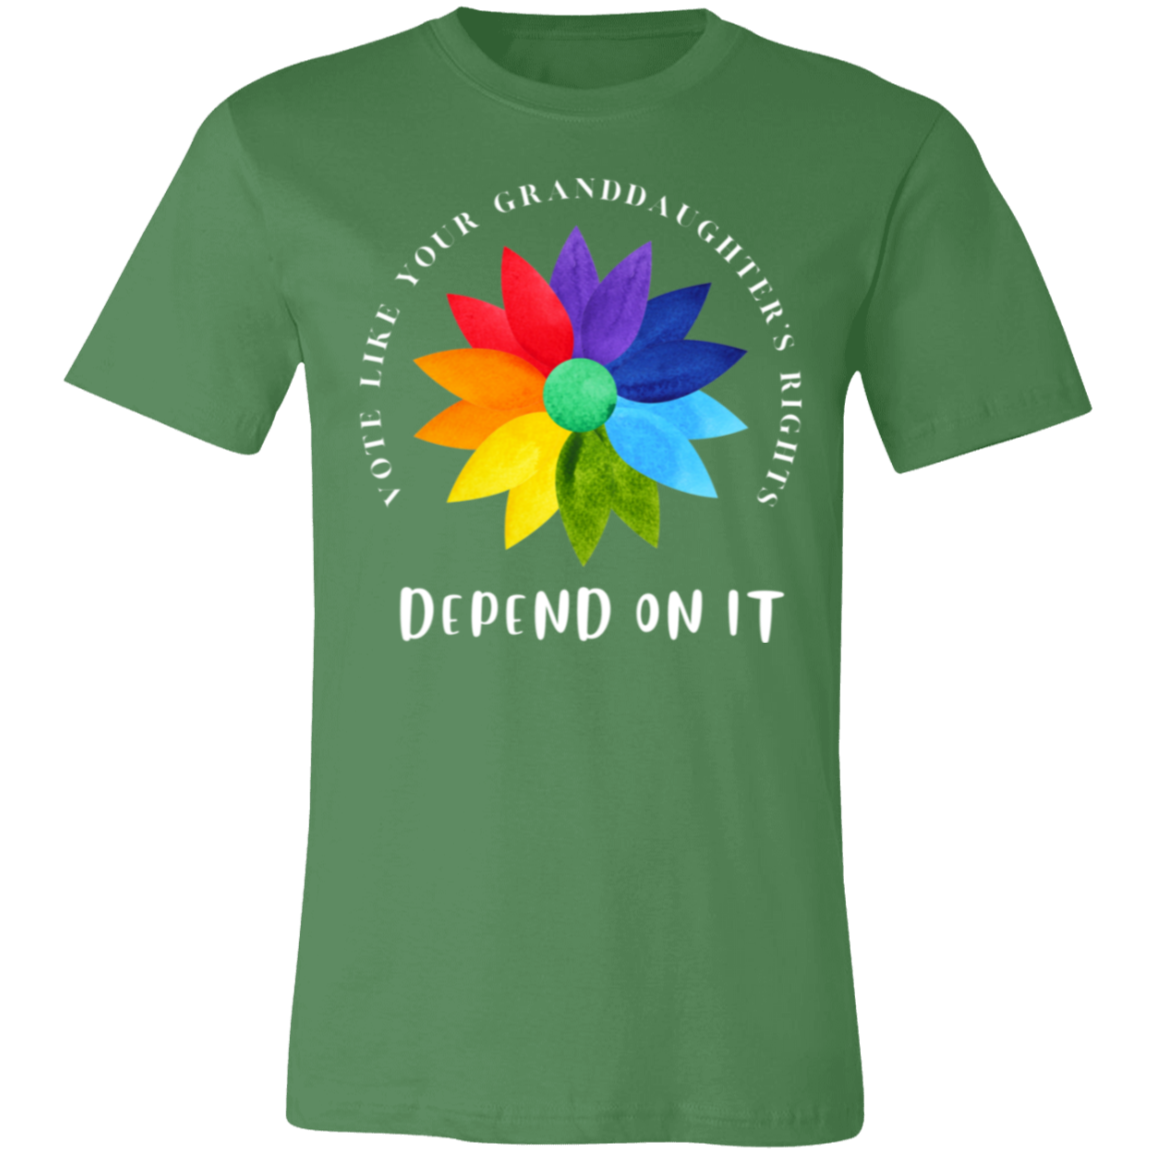 VOTE like your granddaughter’s rights DEPEND ON IT Unisex Short-Sleeve T-Shirt